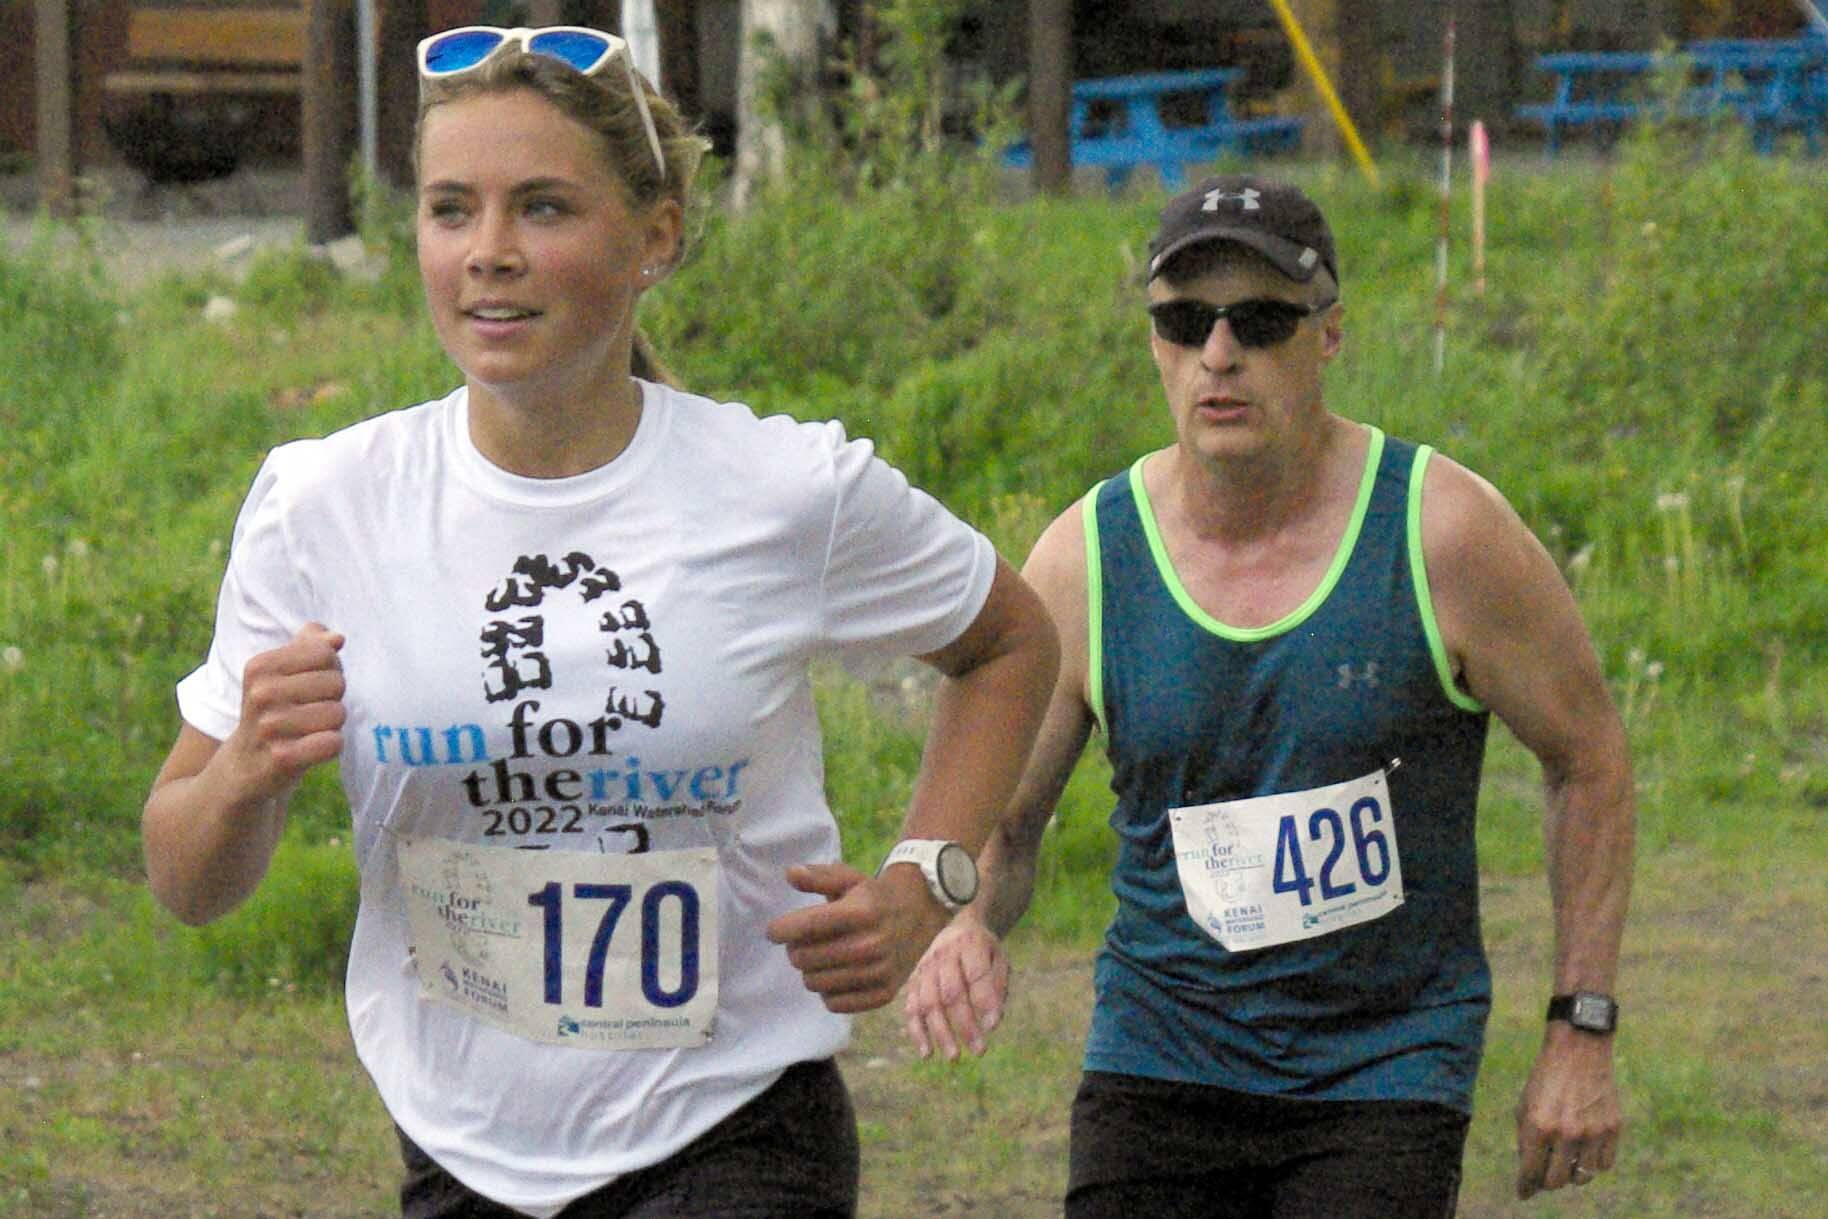 Jordan Strausbaugh, trailed by Ken Youngberg, runs to victory in the women's 5-kilometer race Saturday, June 11, 2022, at the Run for the River in Soldotna, Alaska. (Photo by Jeff Helminiak/Peninsula Clarion)